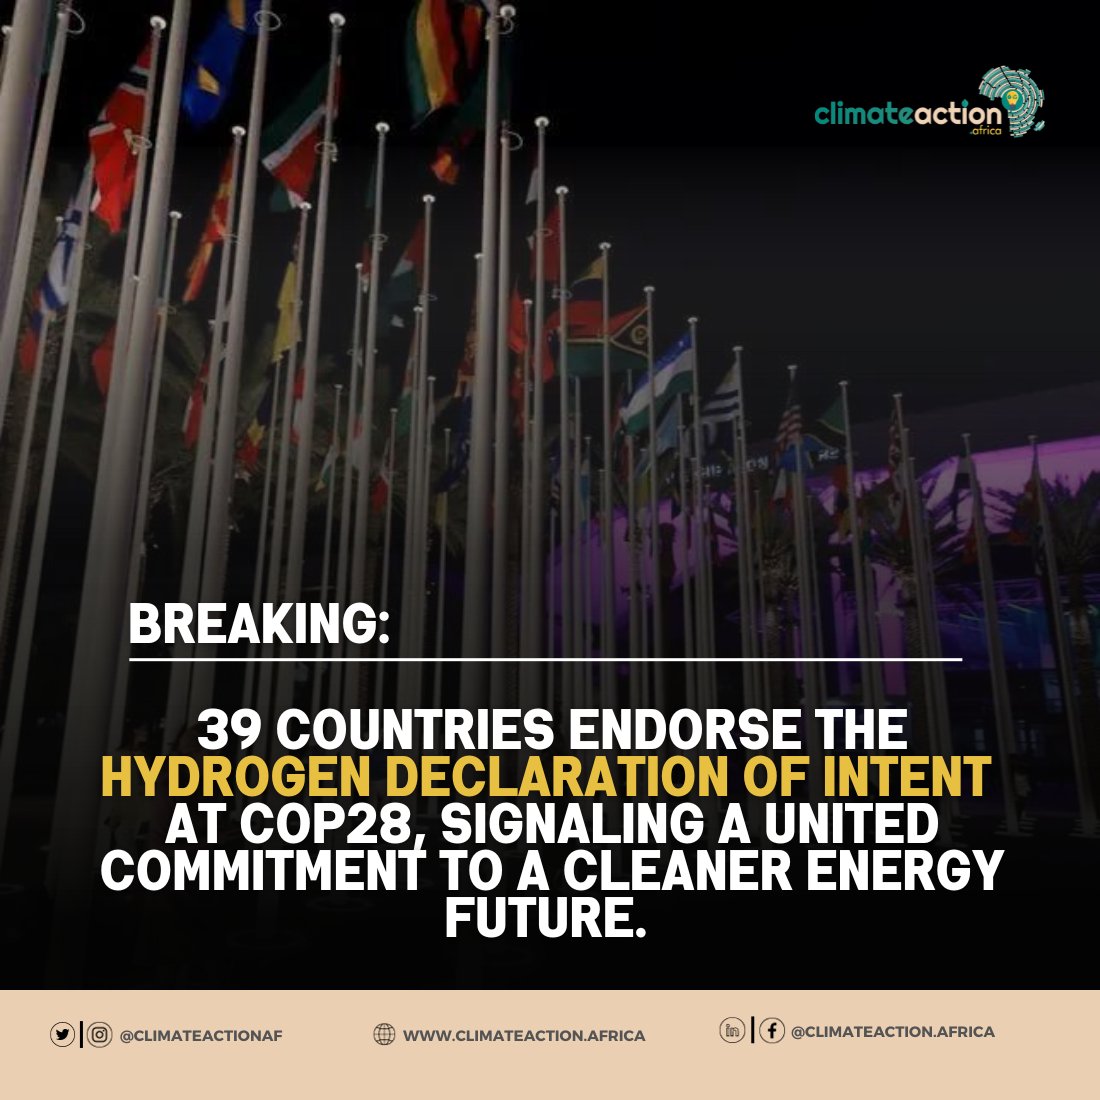 🌐Breaking News! 39 countries unite at #COP28 for a hydrogen-powered future. 🤝 Launching game-changing initiatives like the Public-Private Action Statement and ISO methodology, they're fast-tracking clean energy globally. 🌍💡 #HydrogenRevolution #ClimateLeadership